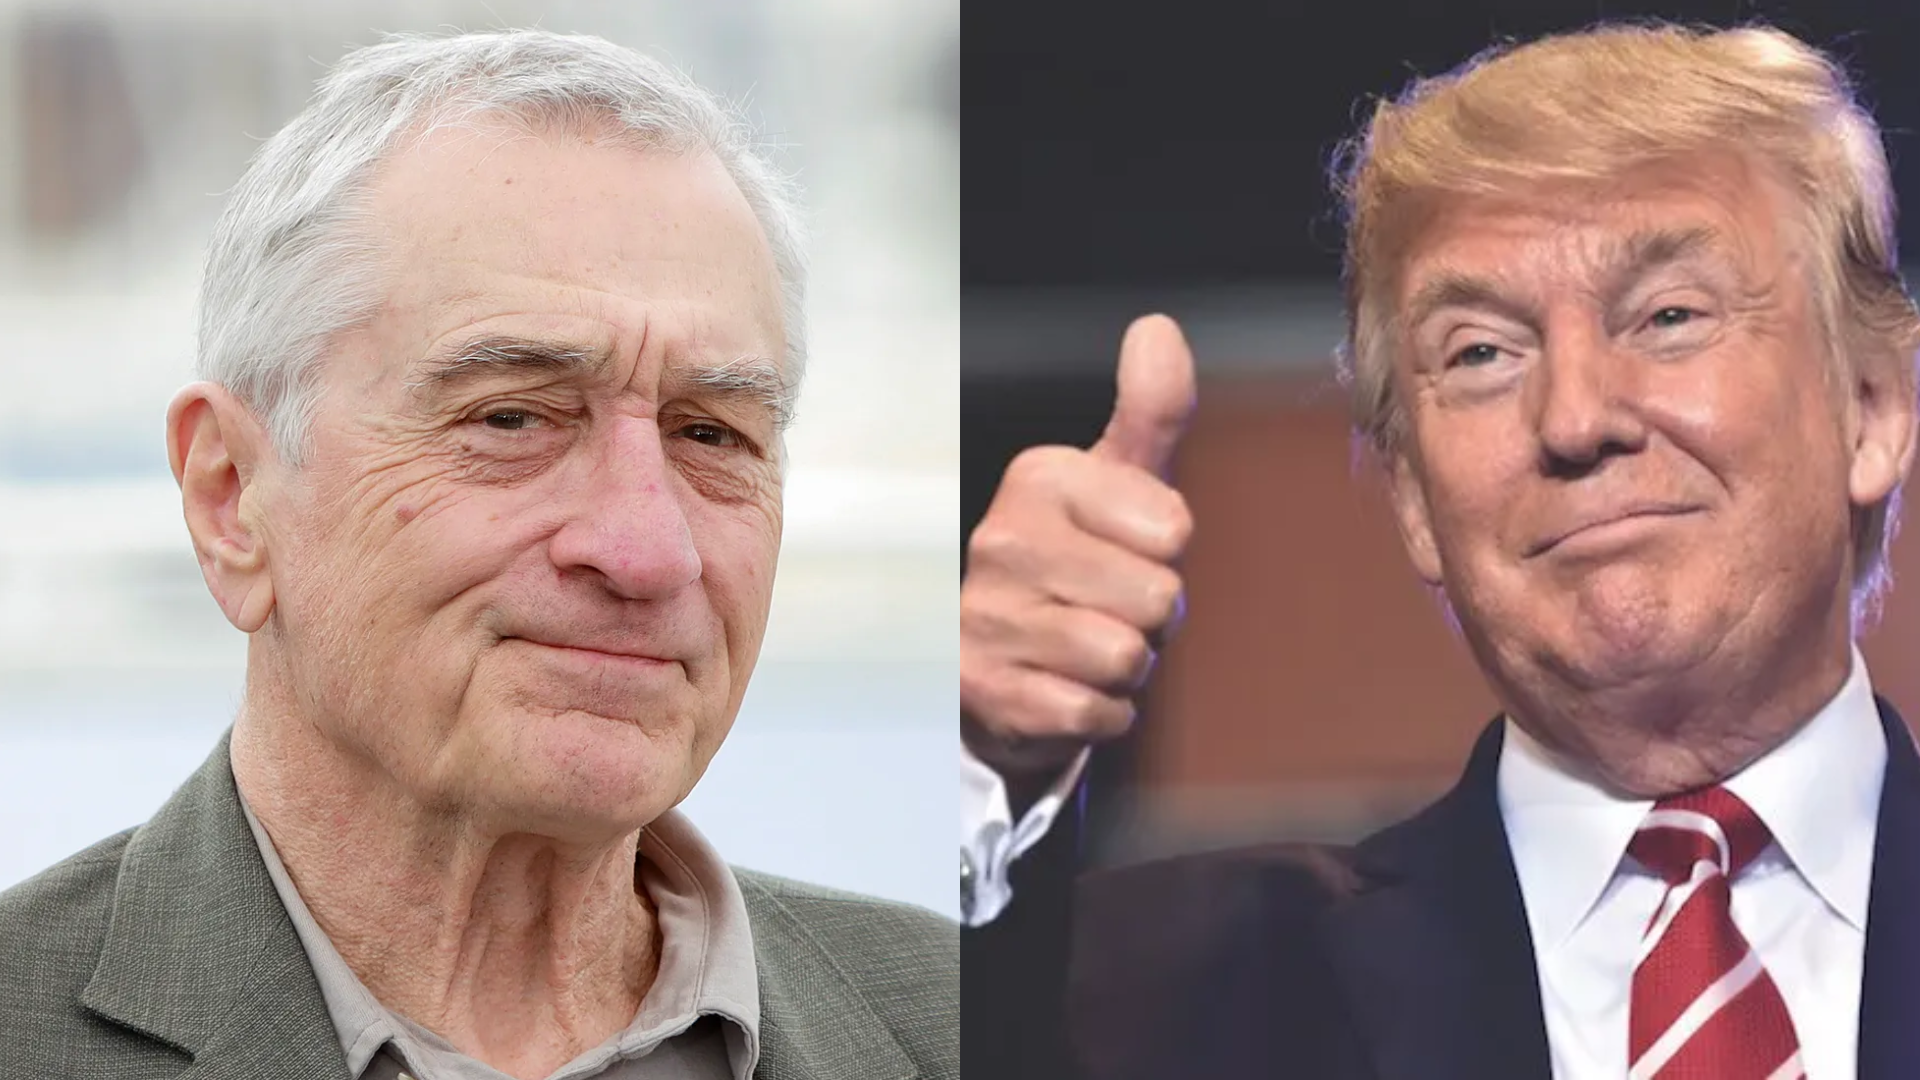 Robert De Niro Stripped Of A Prestigious Leadership Award After Labelling Donald Trump As ‘Clown’ And ‘Monster’